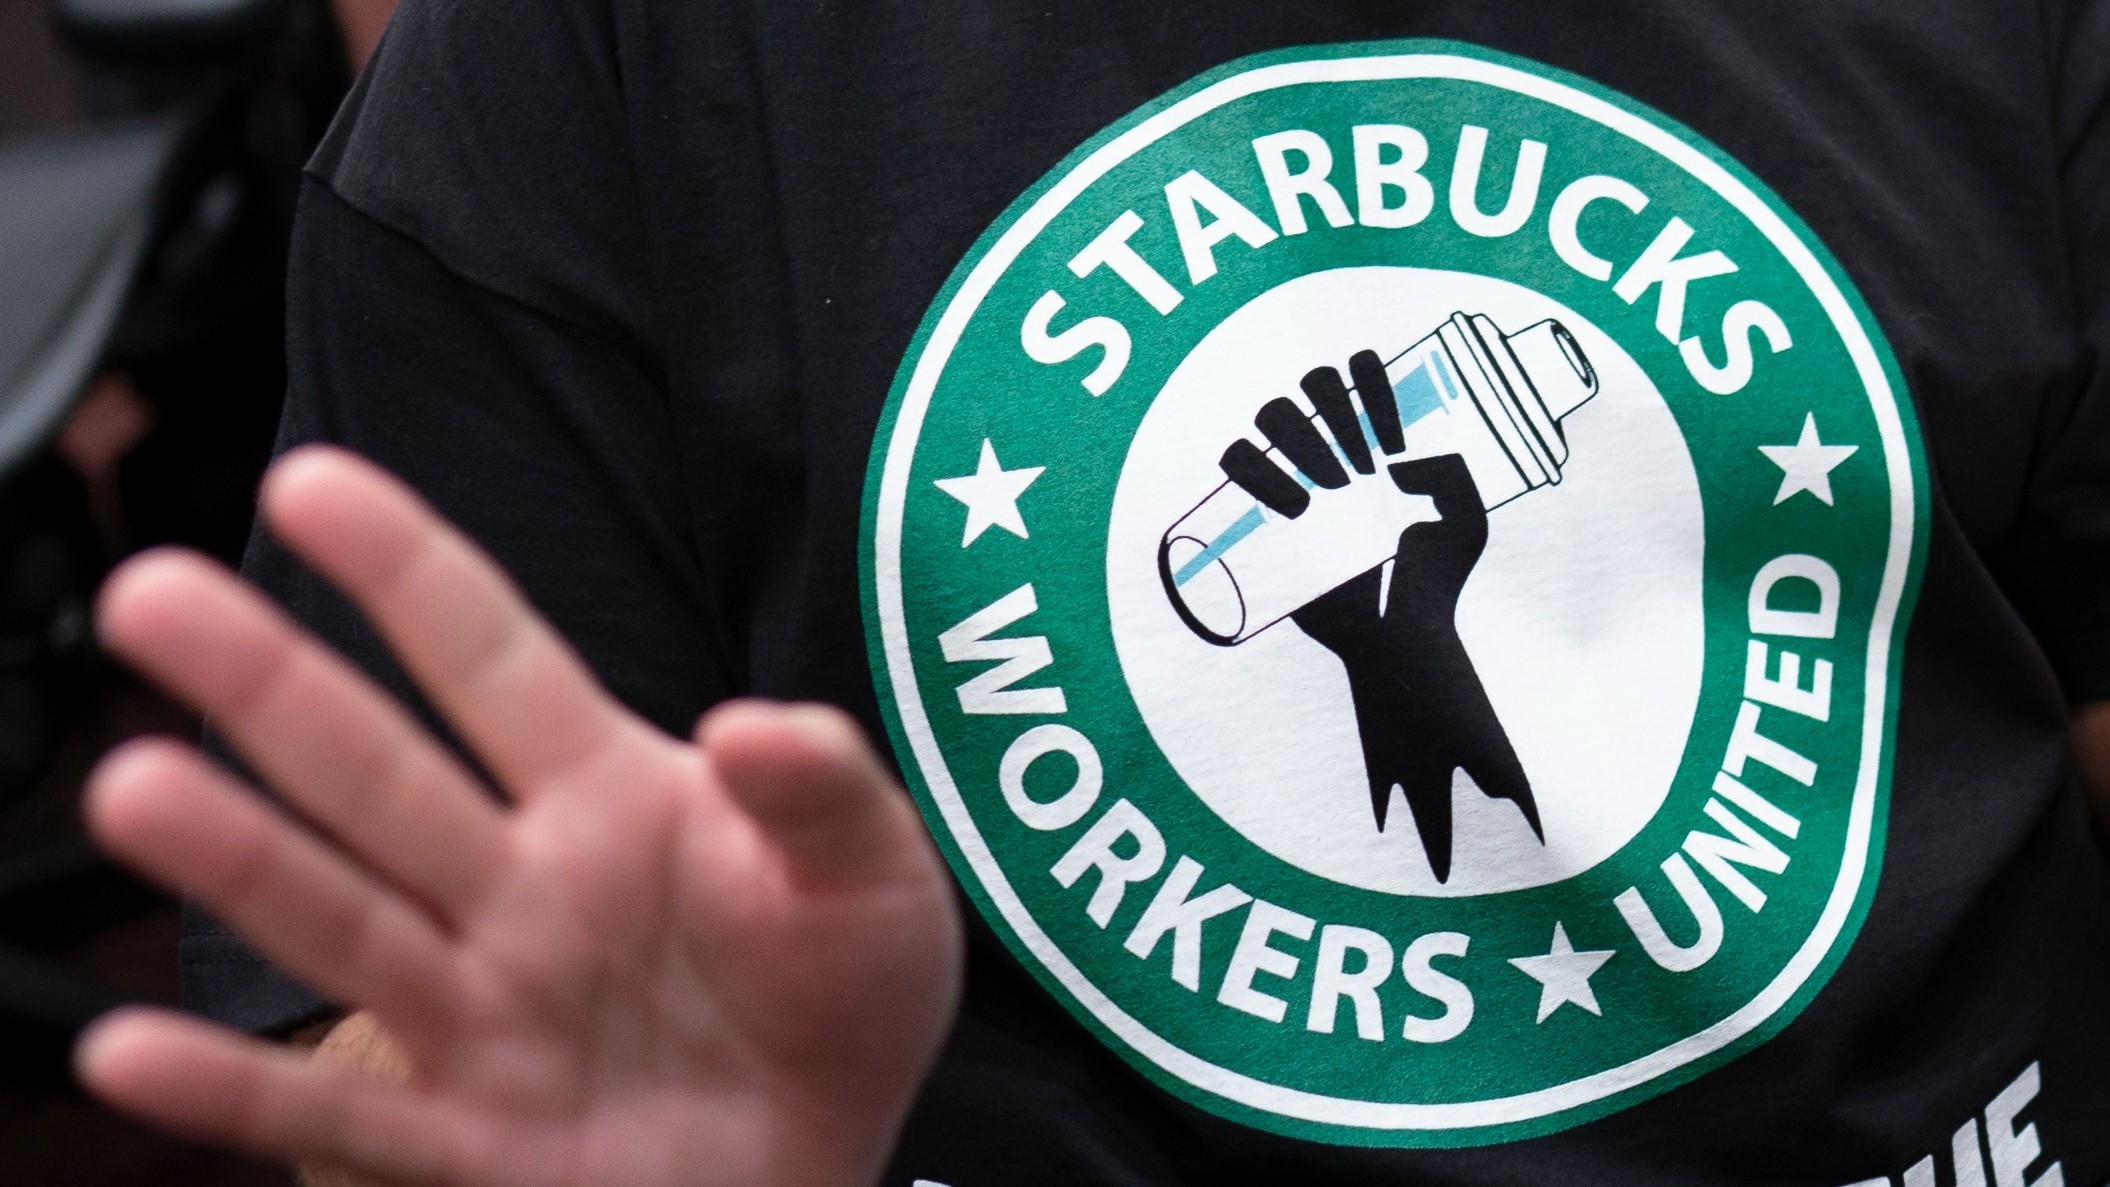 The Starbucks Workers United logo on the shirt of a former Starbucks employee attending a hearing at the Capitol in Washington, on 29 March (AP)